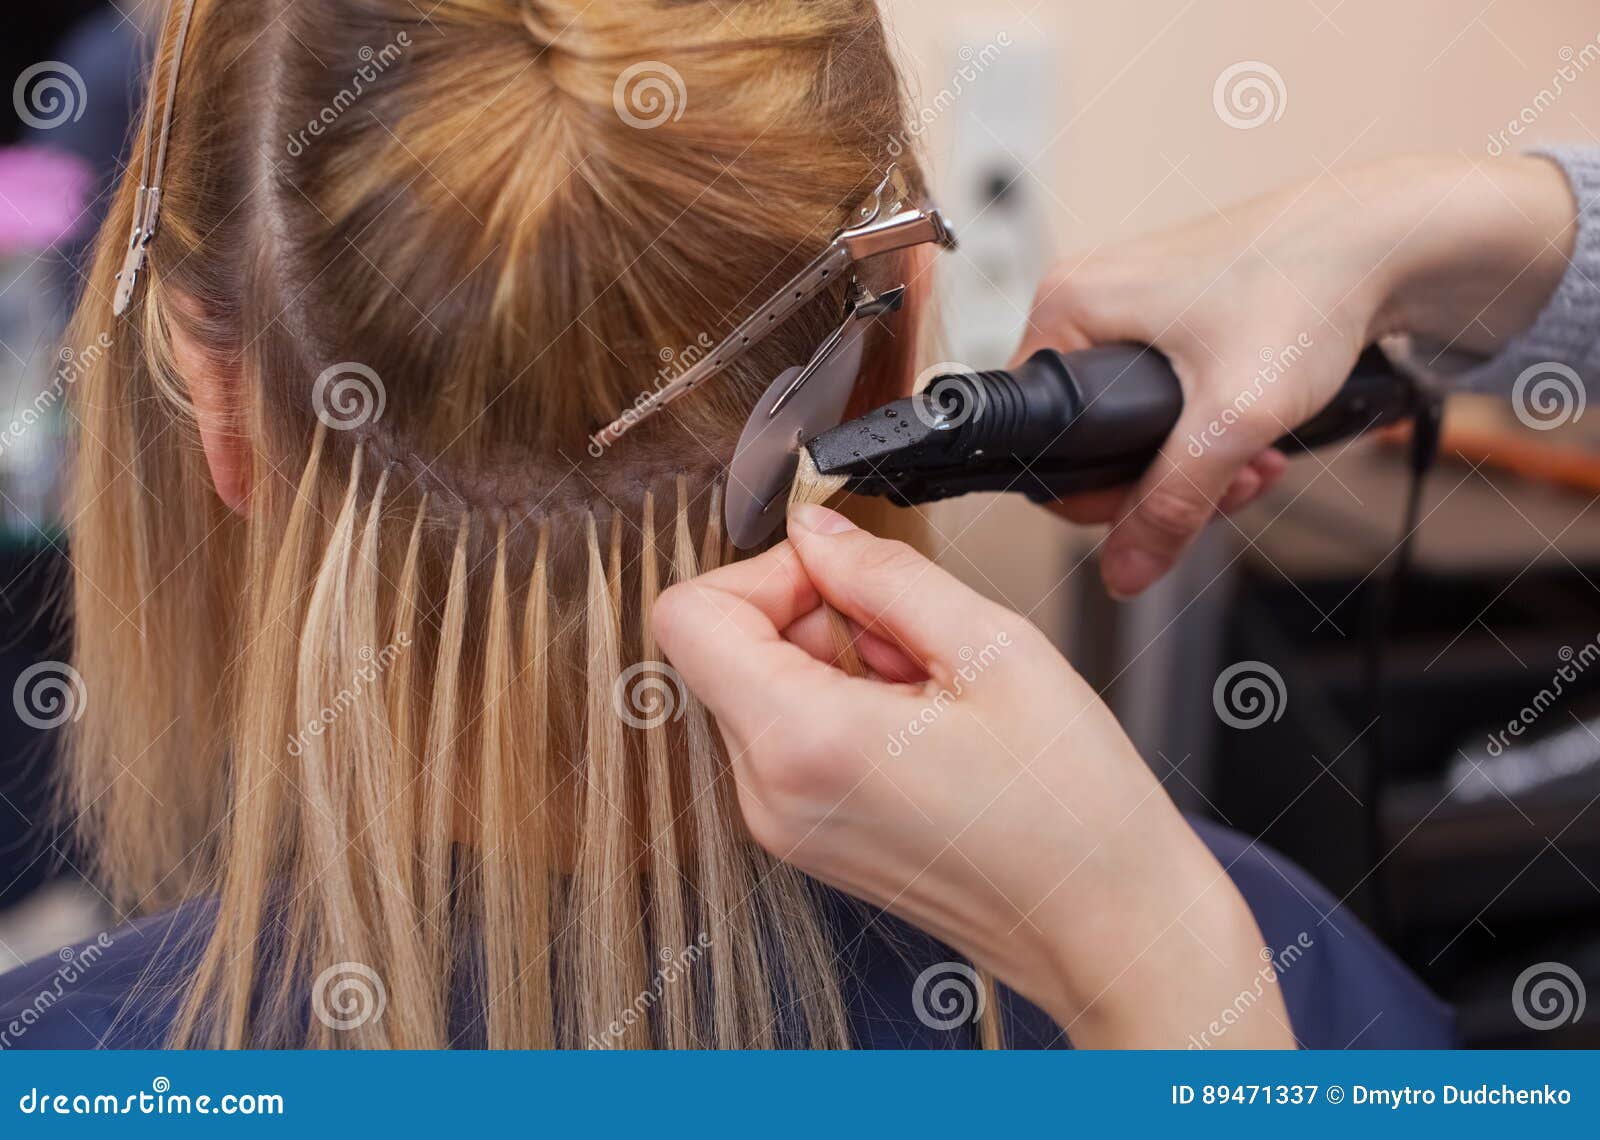 the hairdresser does hair extensions to a young girl, a blonde in a beauty salon.